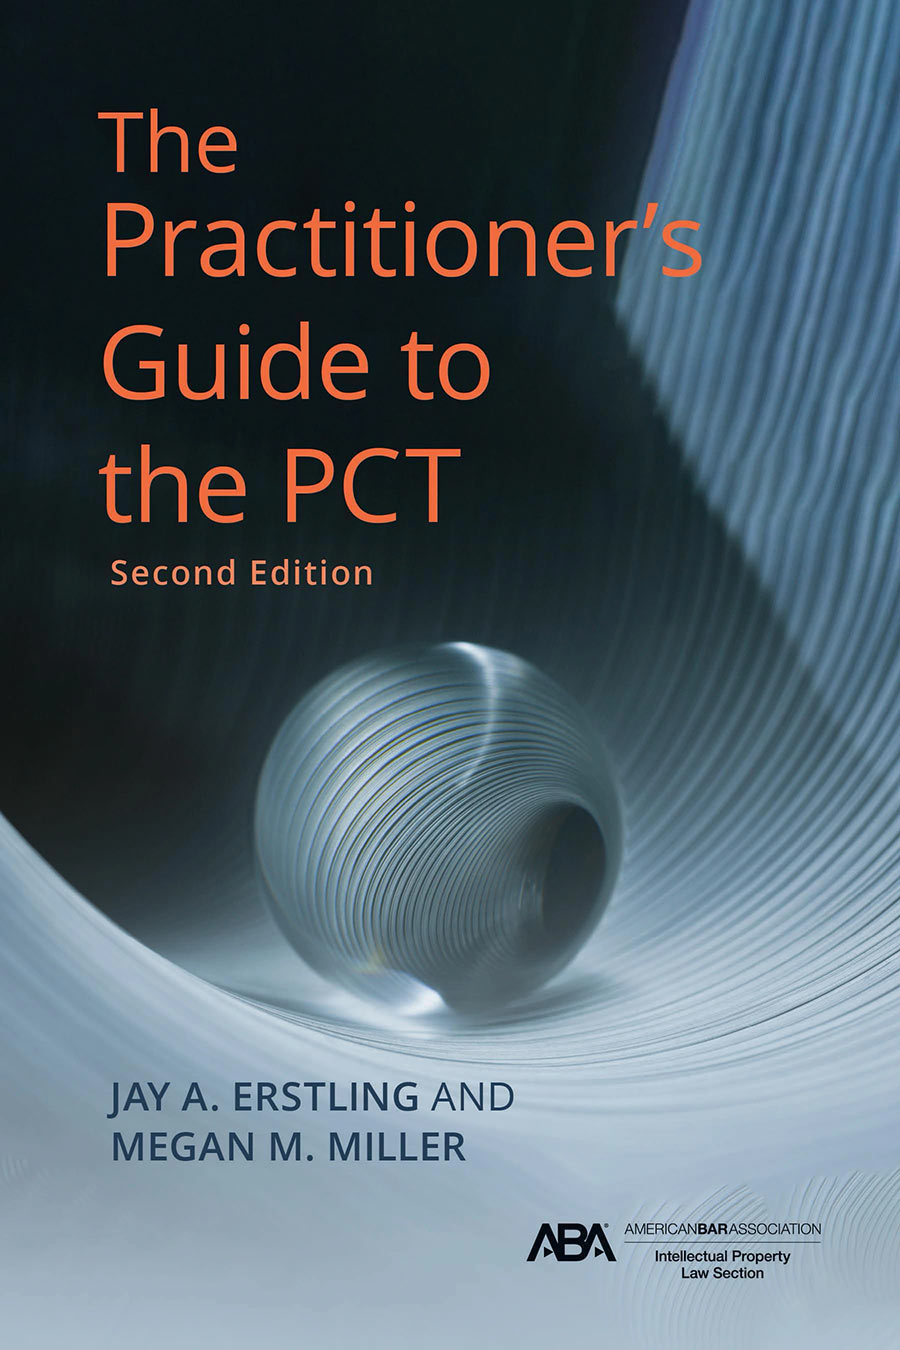 The Practitioner’s Guide to the PCT